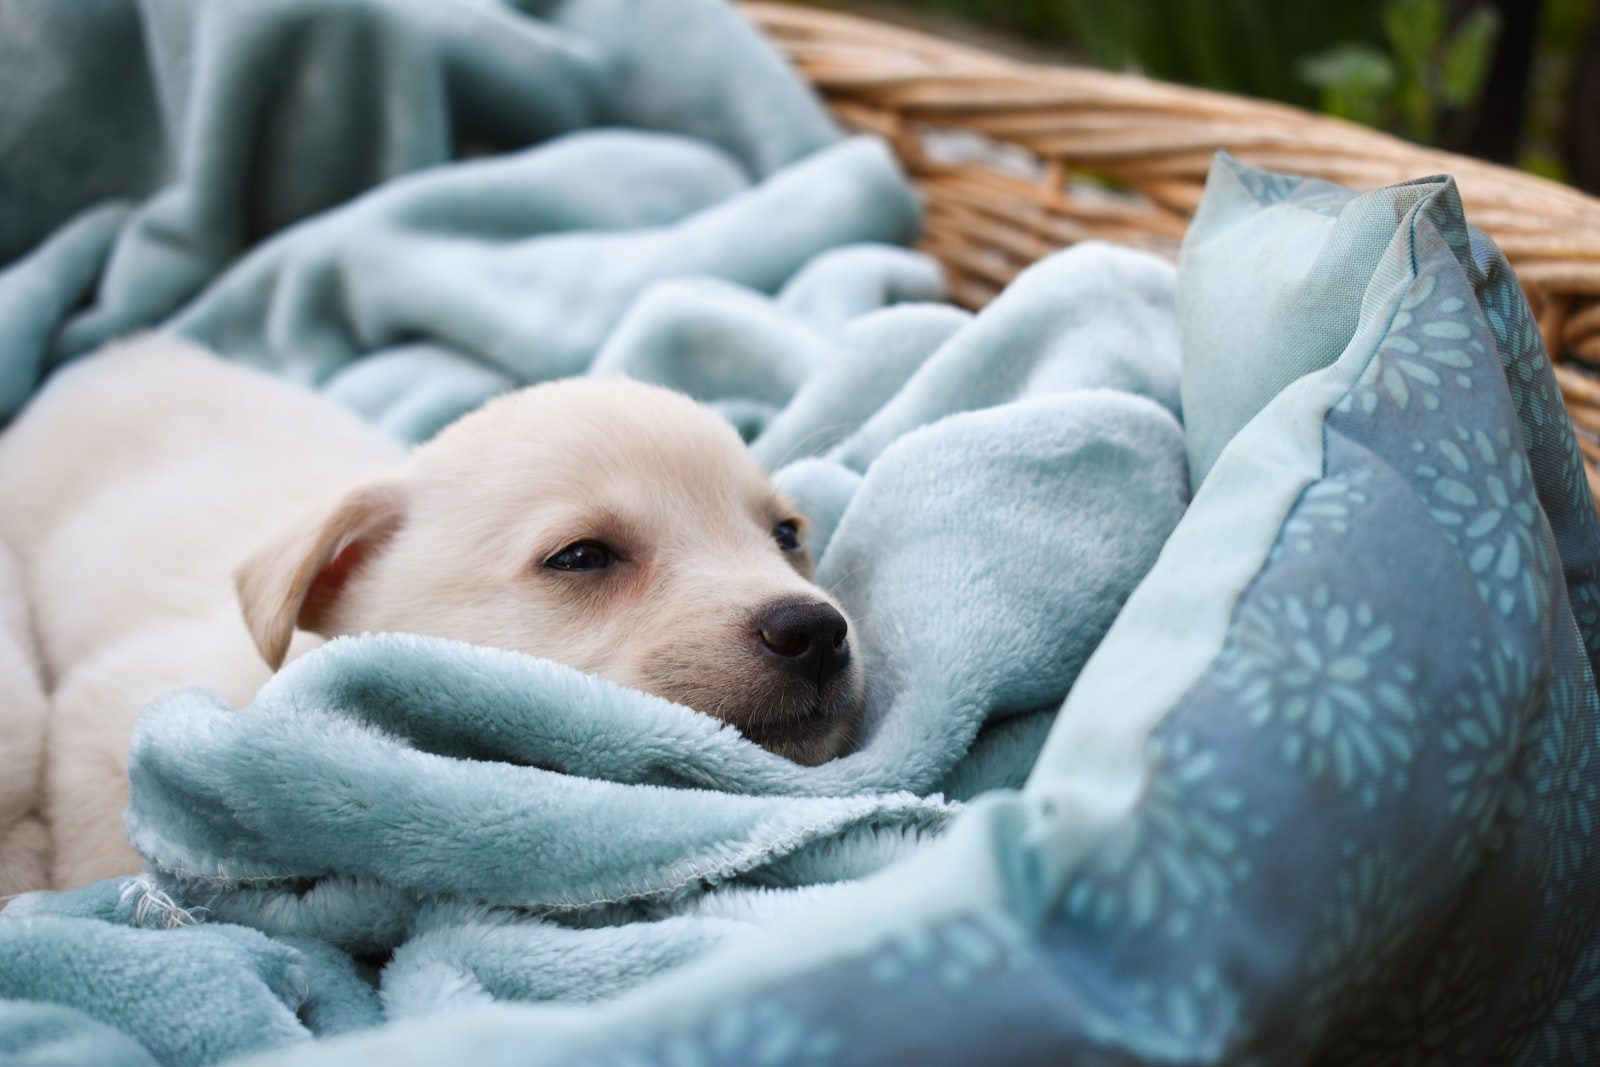 How best to prepare for your new dog’s arrival